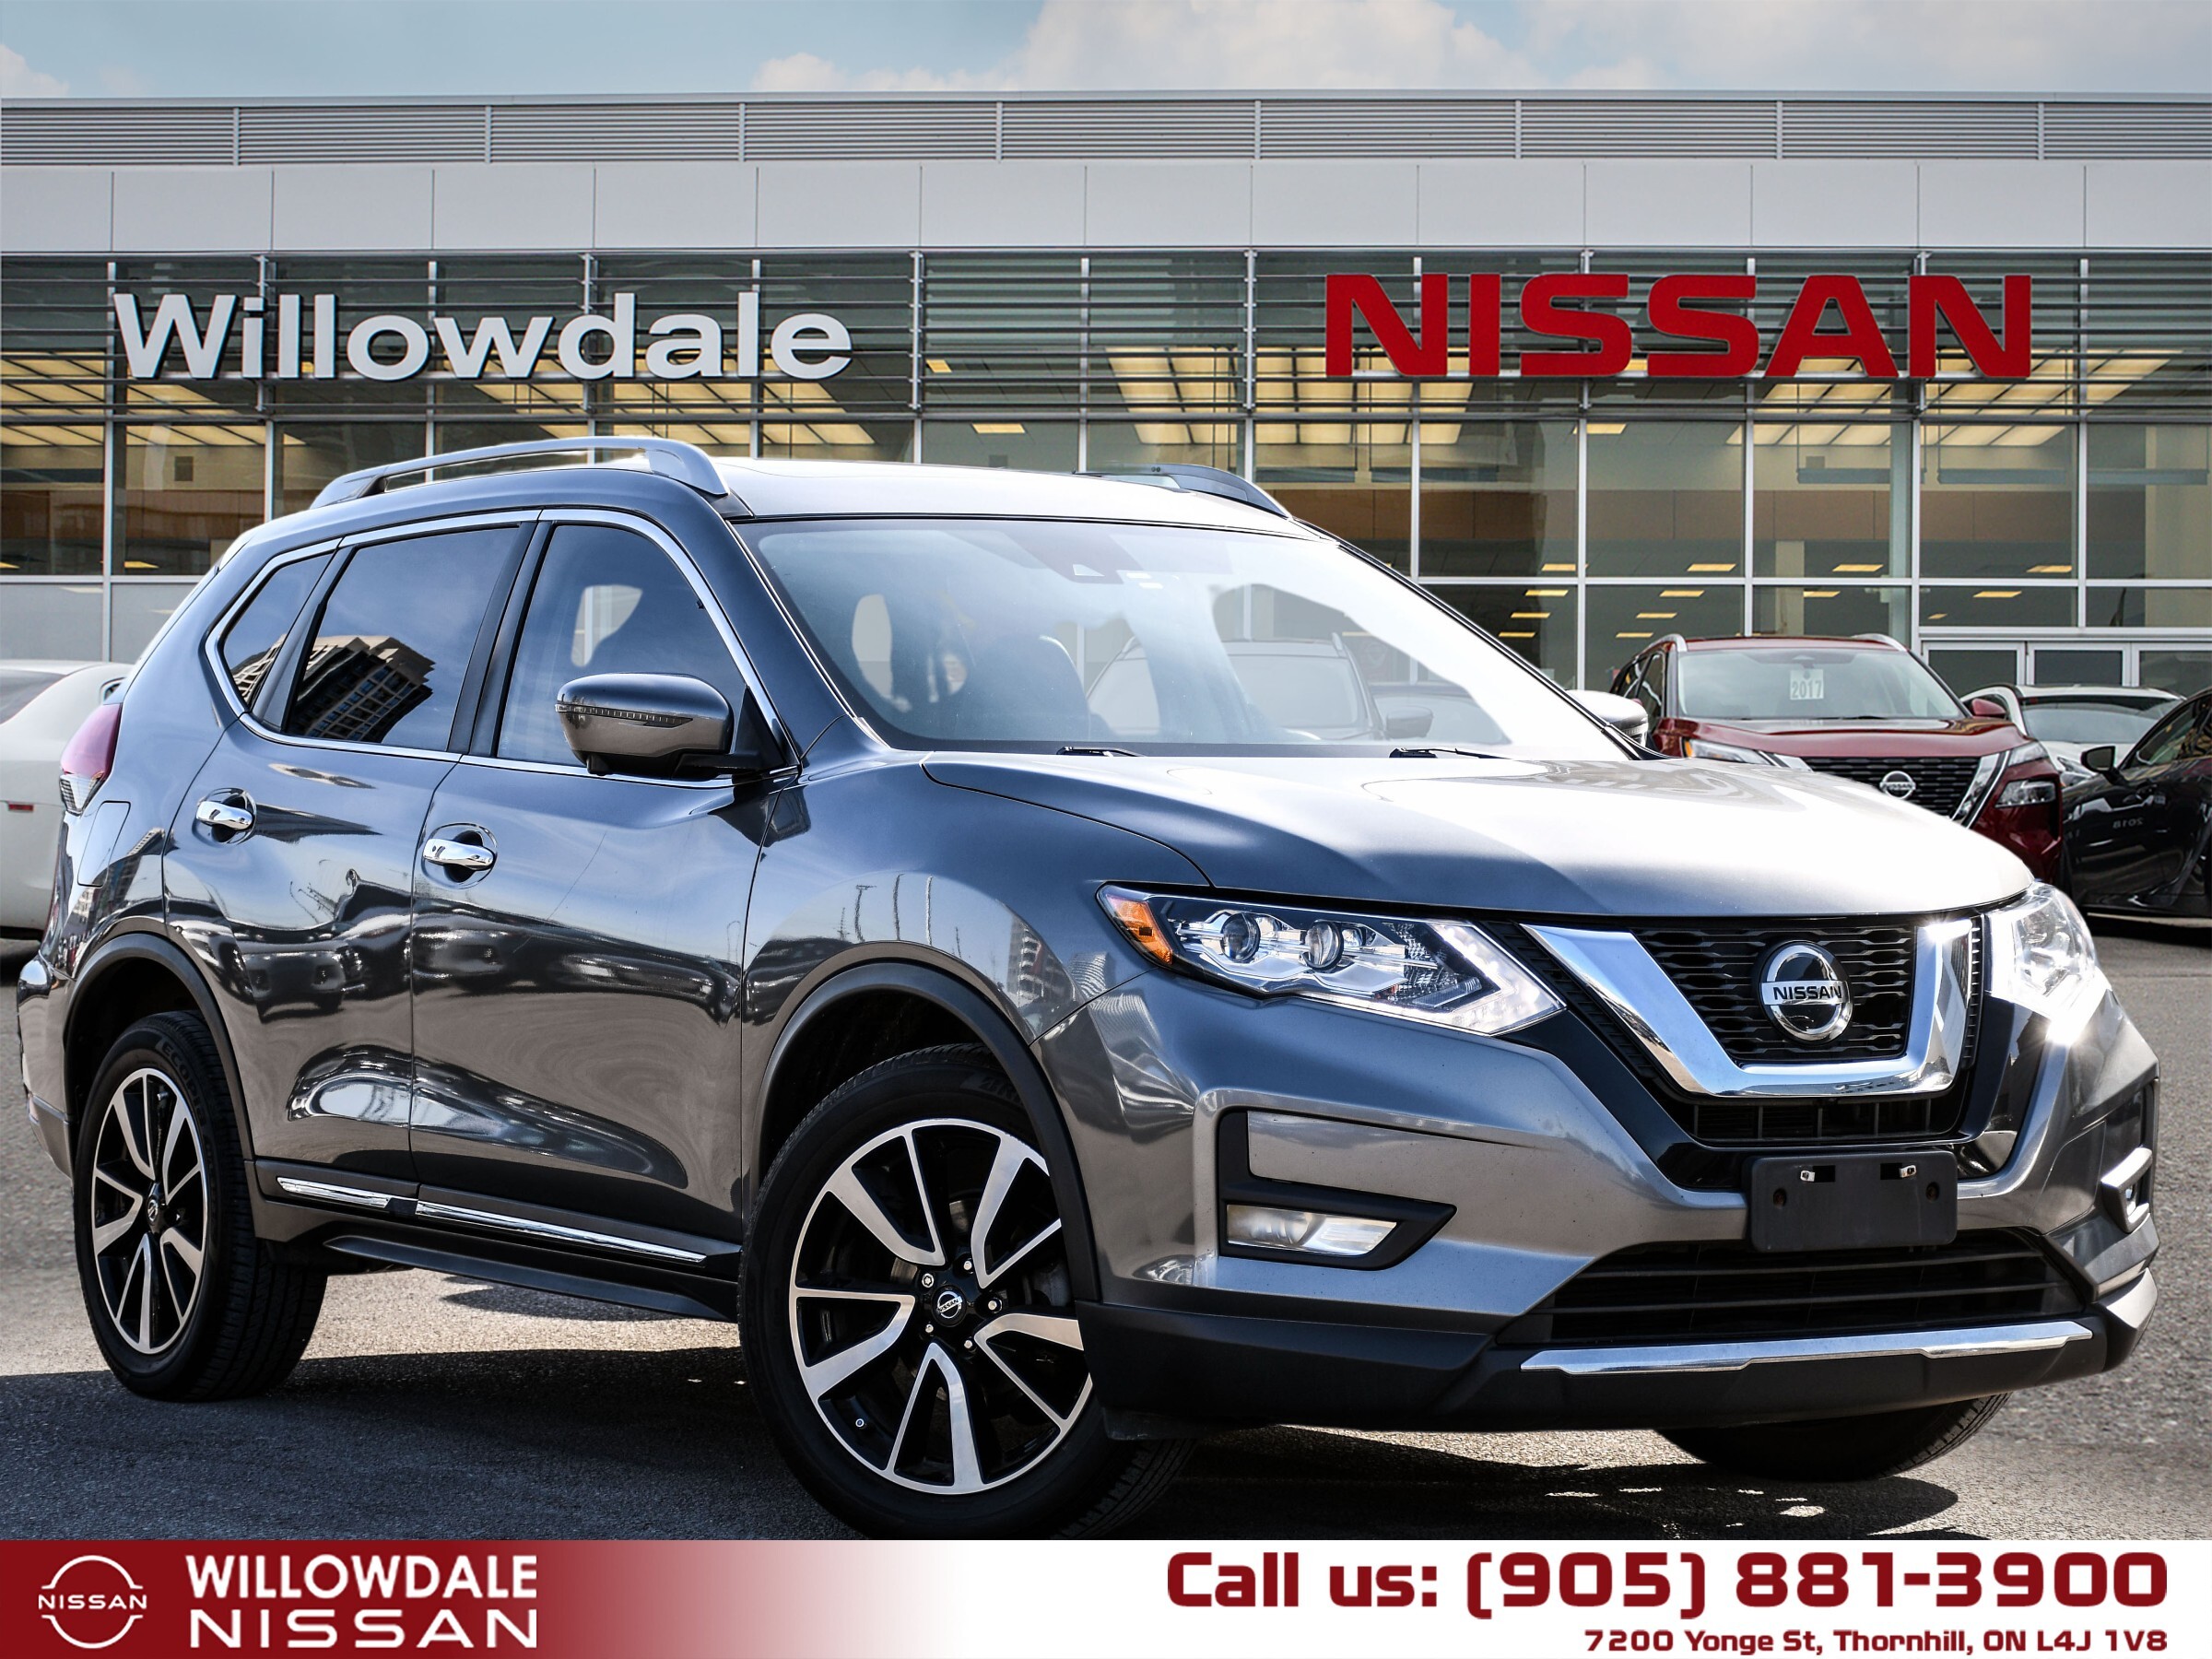 2020 Nissan Rogue SL - SALE EVENT MAY 24- MAY 25